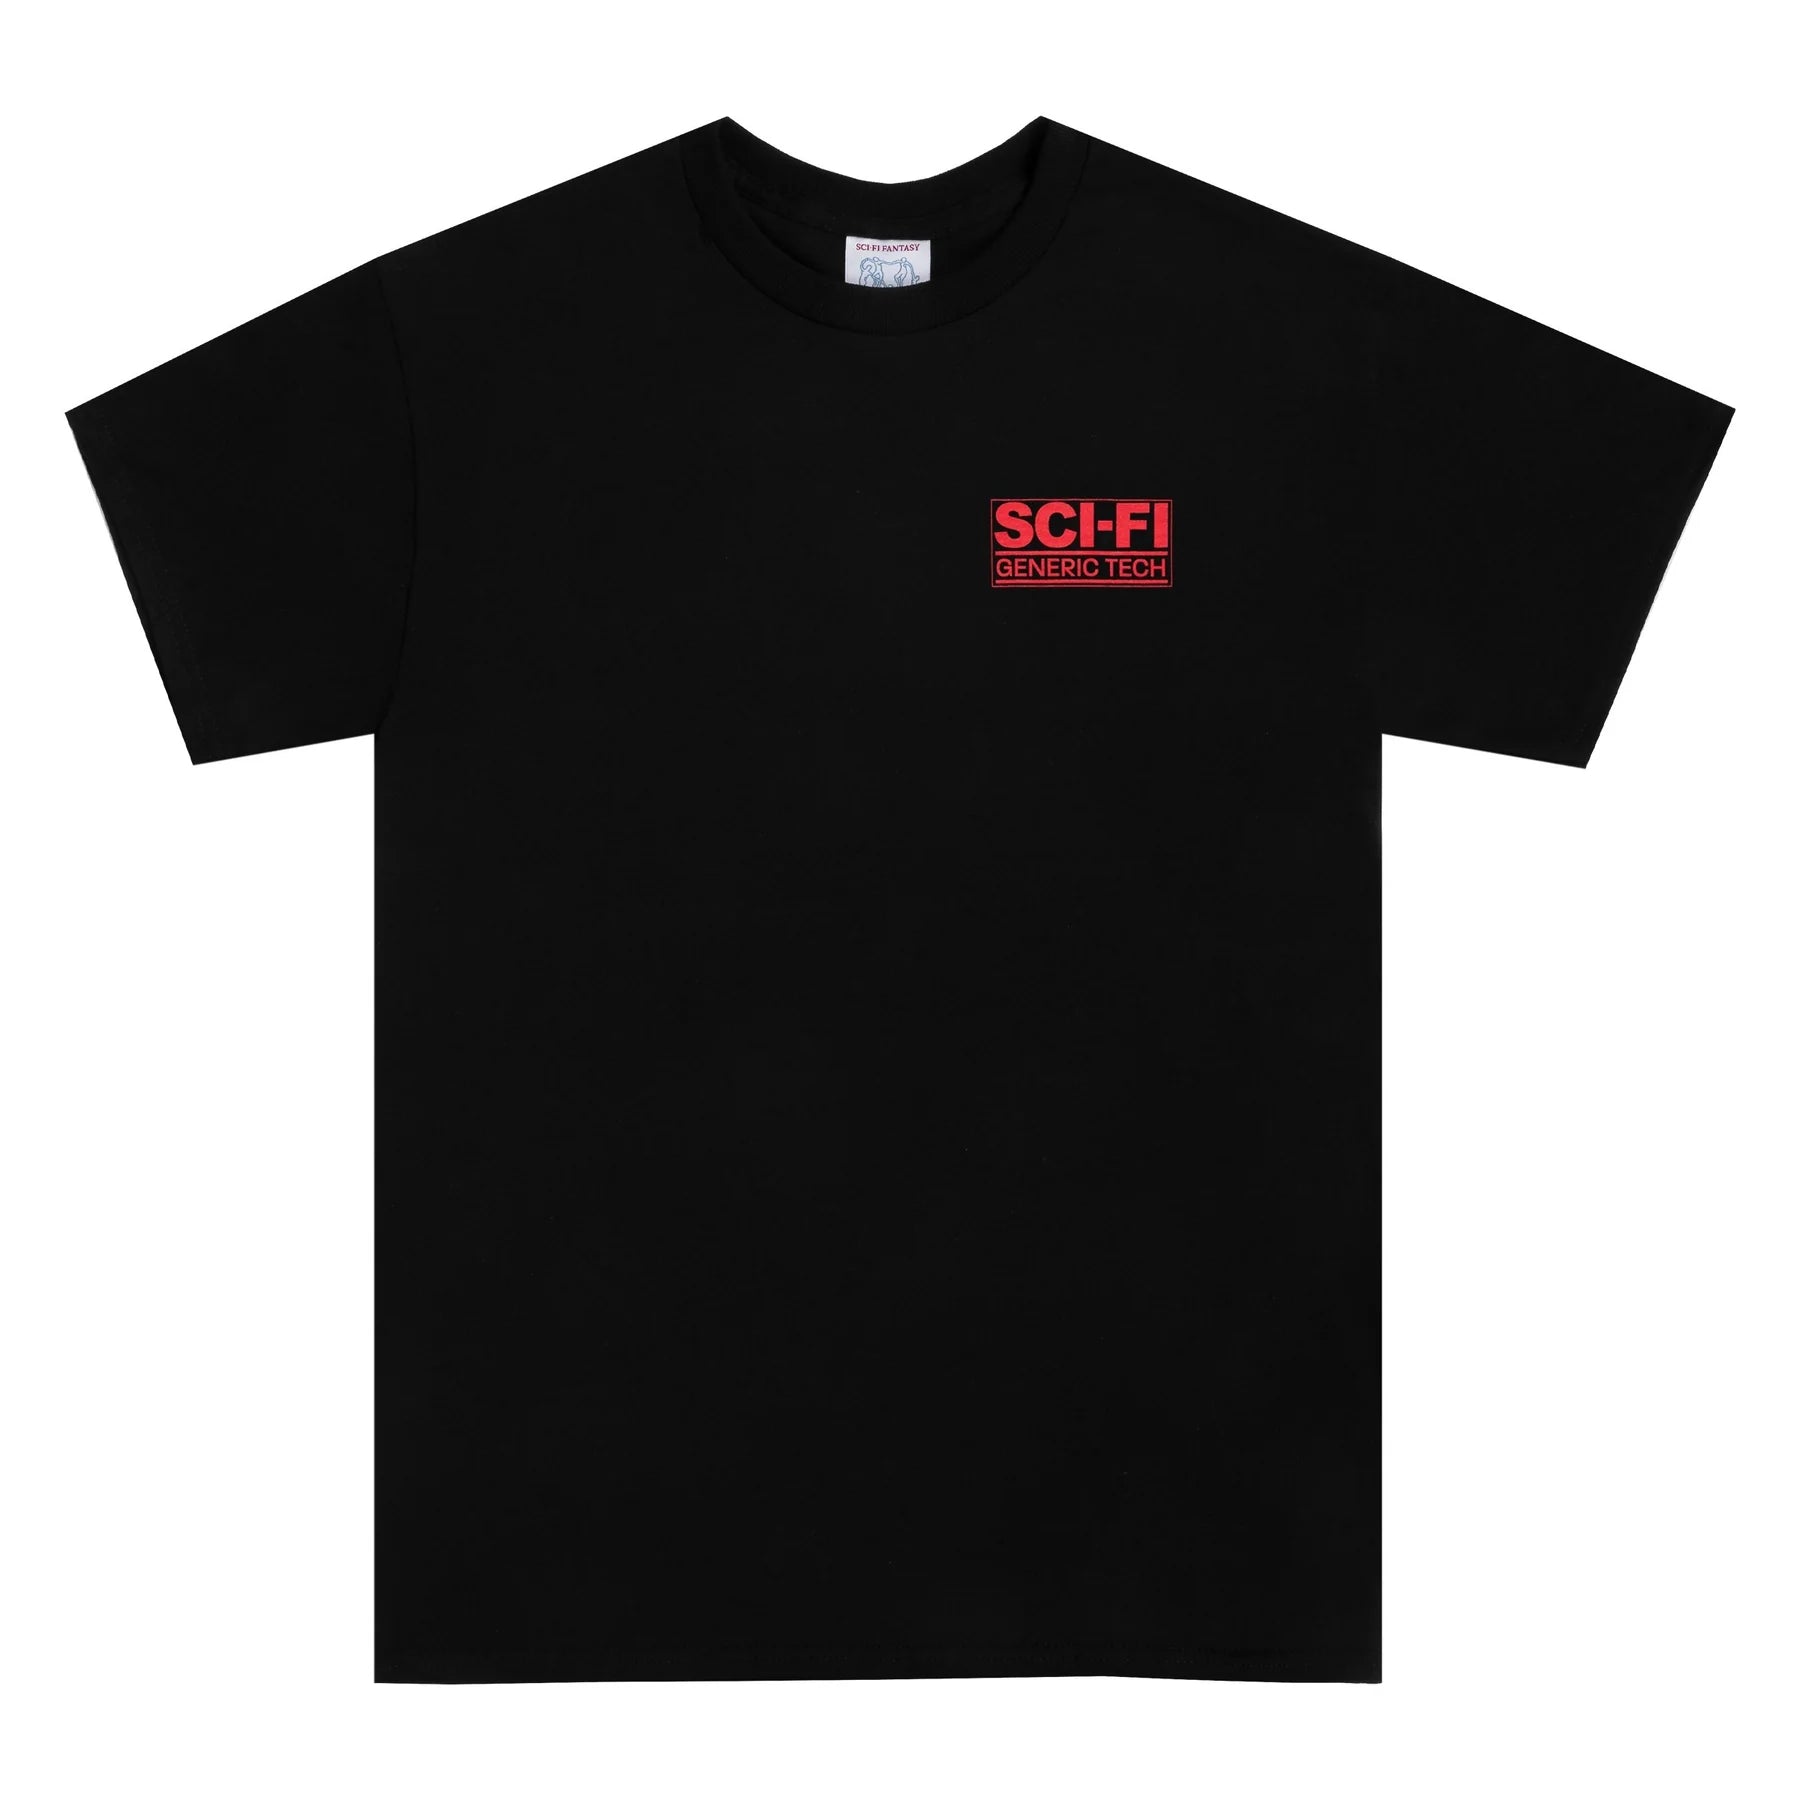 Black sci fi fantasy short sleeve t-shirt with a red logo on the front. Free uk shipping over £50